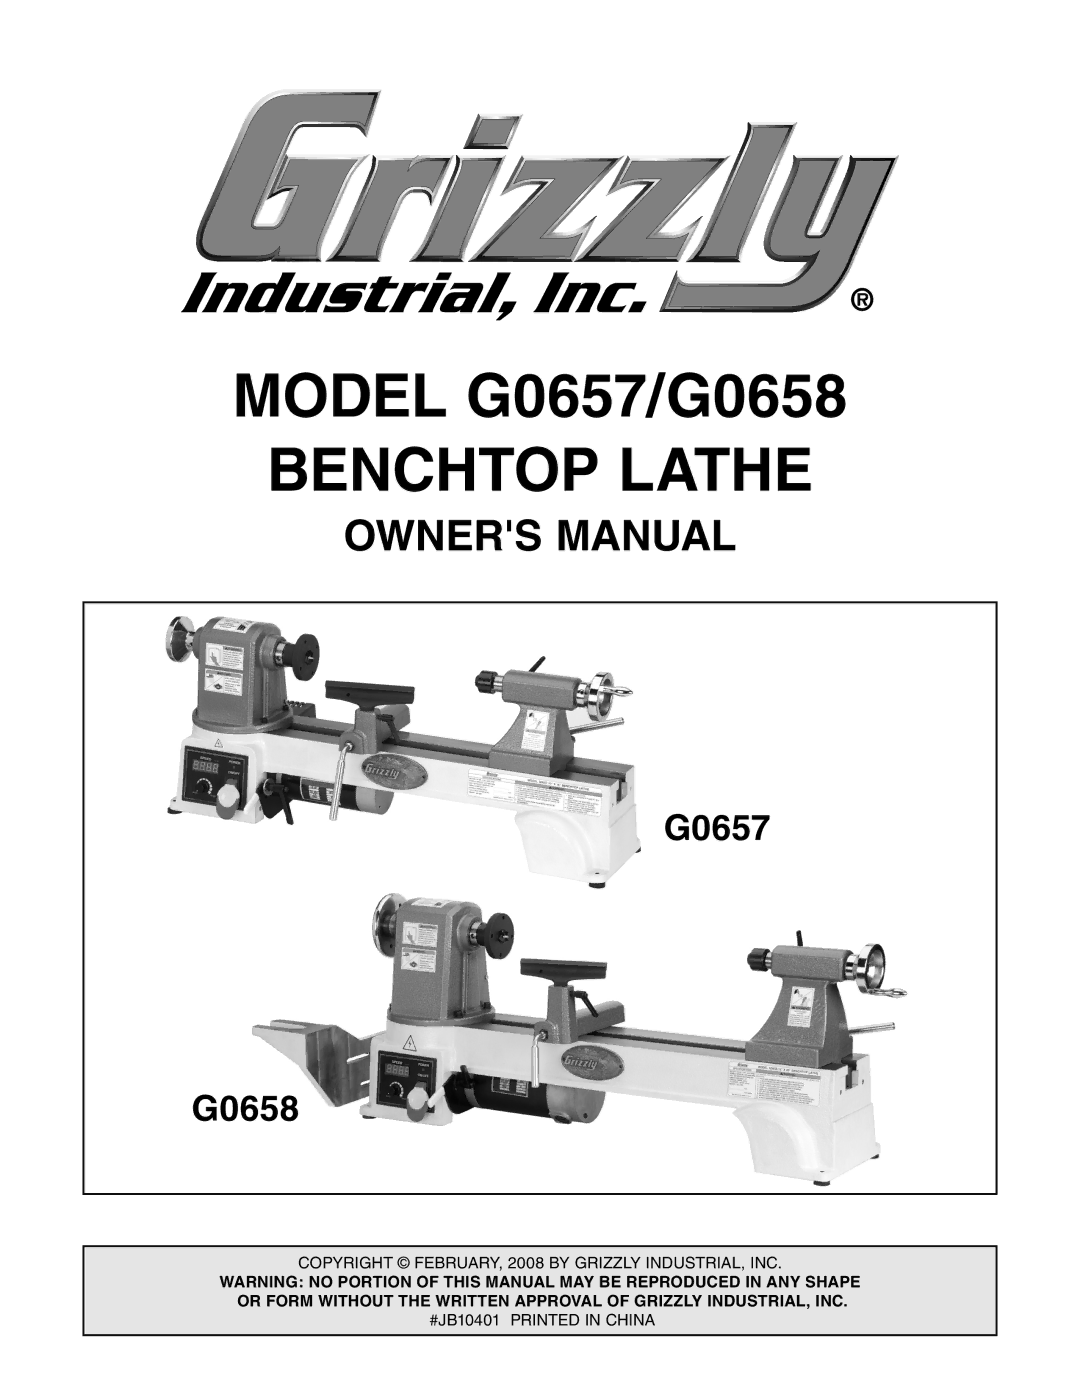 Grizzly G0657/G0658 owner manual Benchtop Lathe 